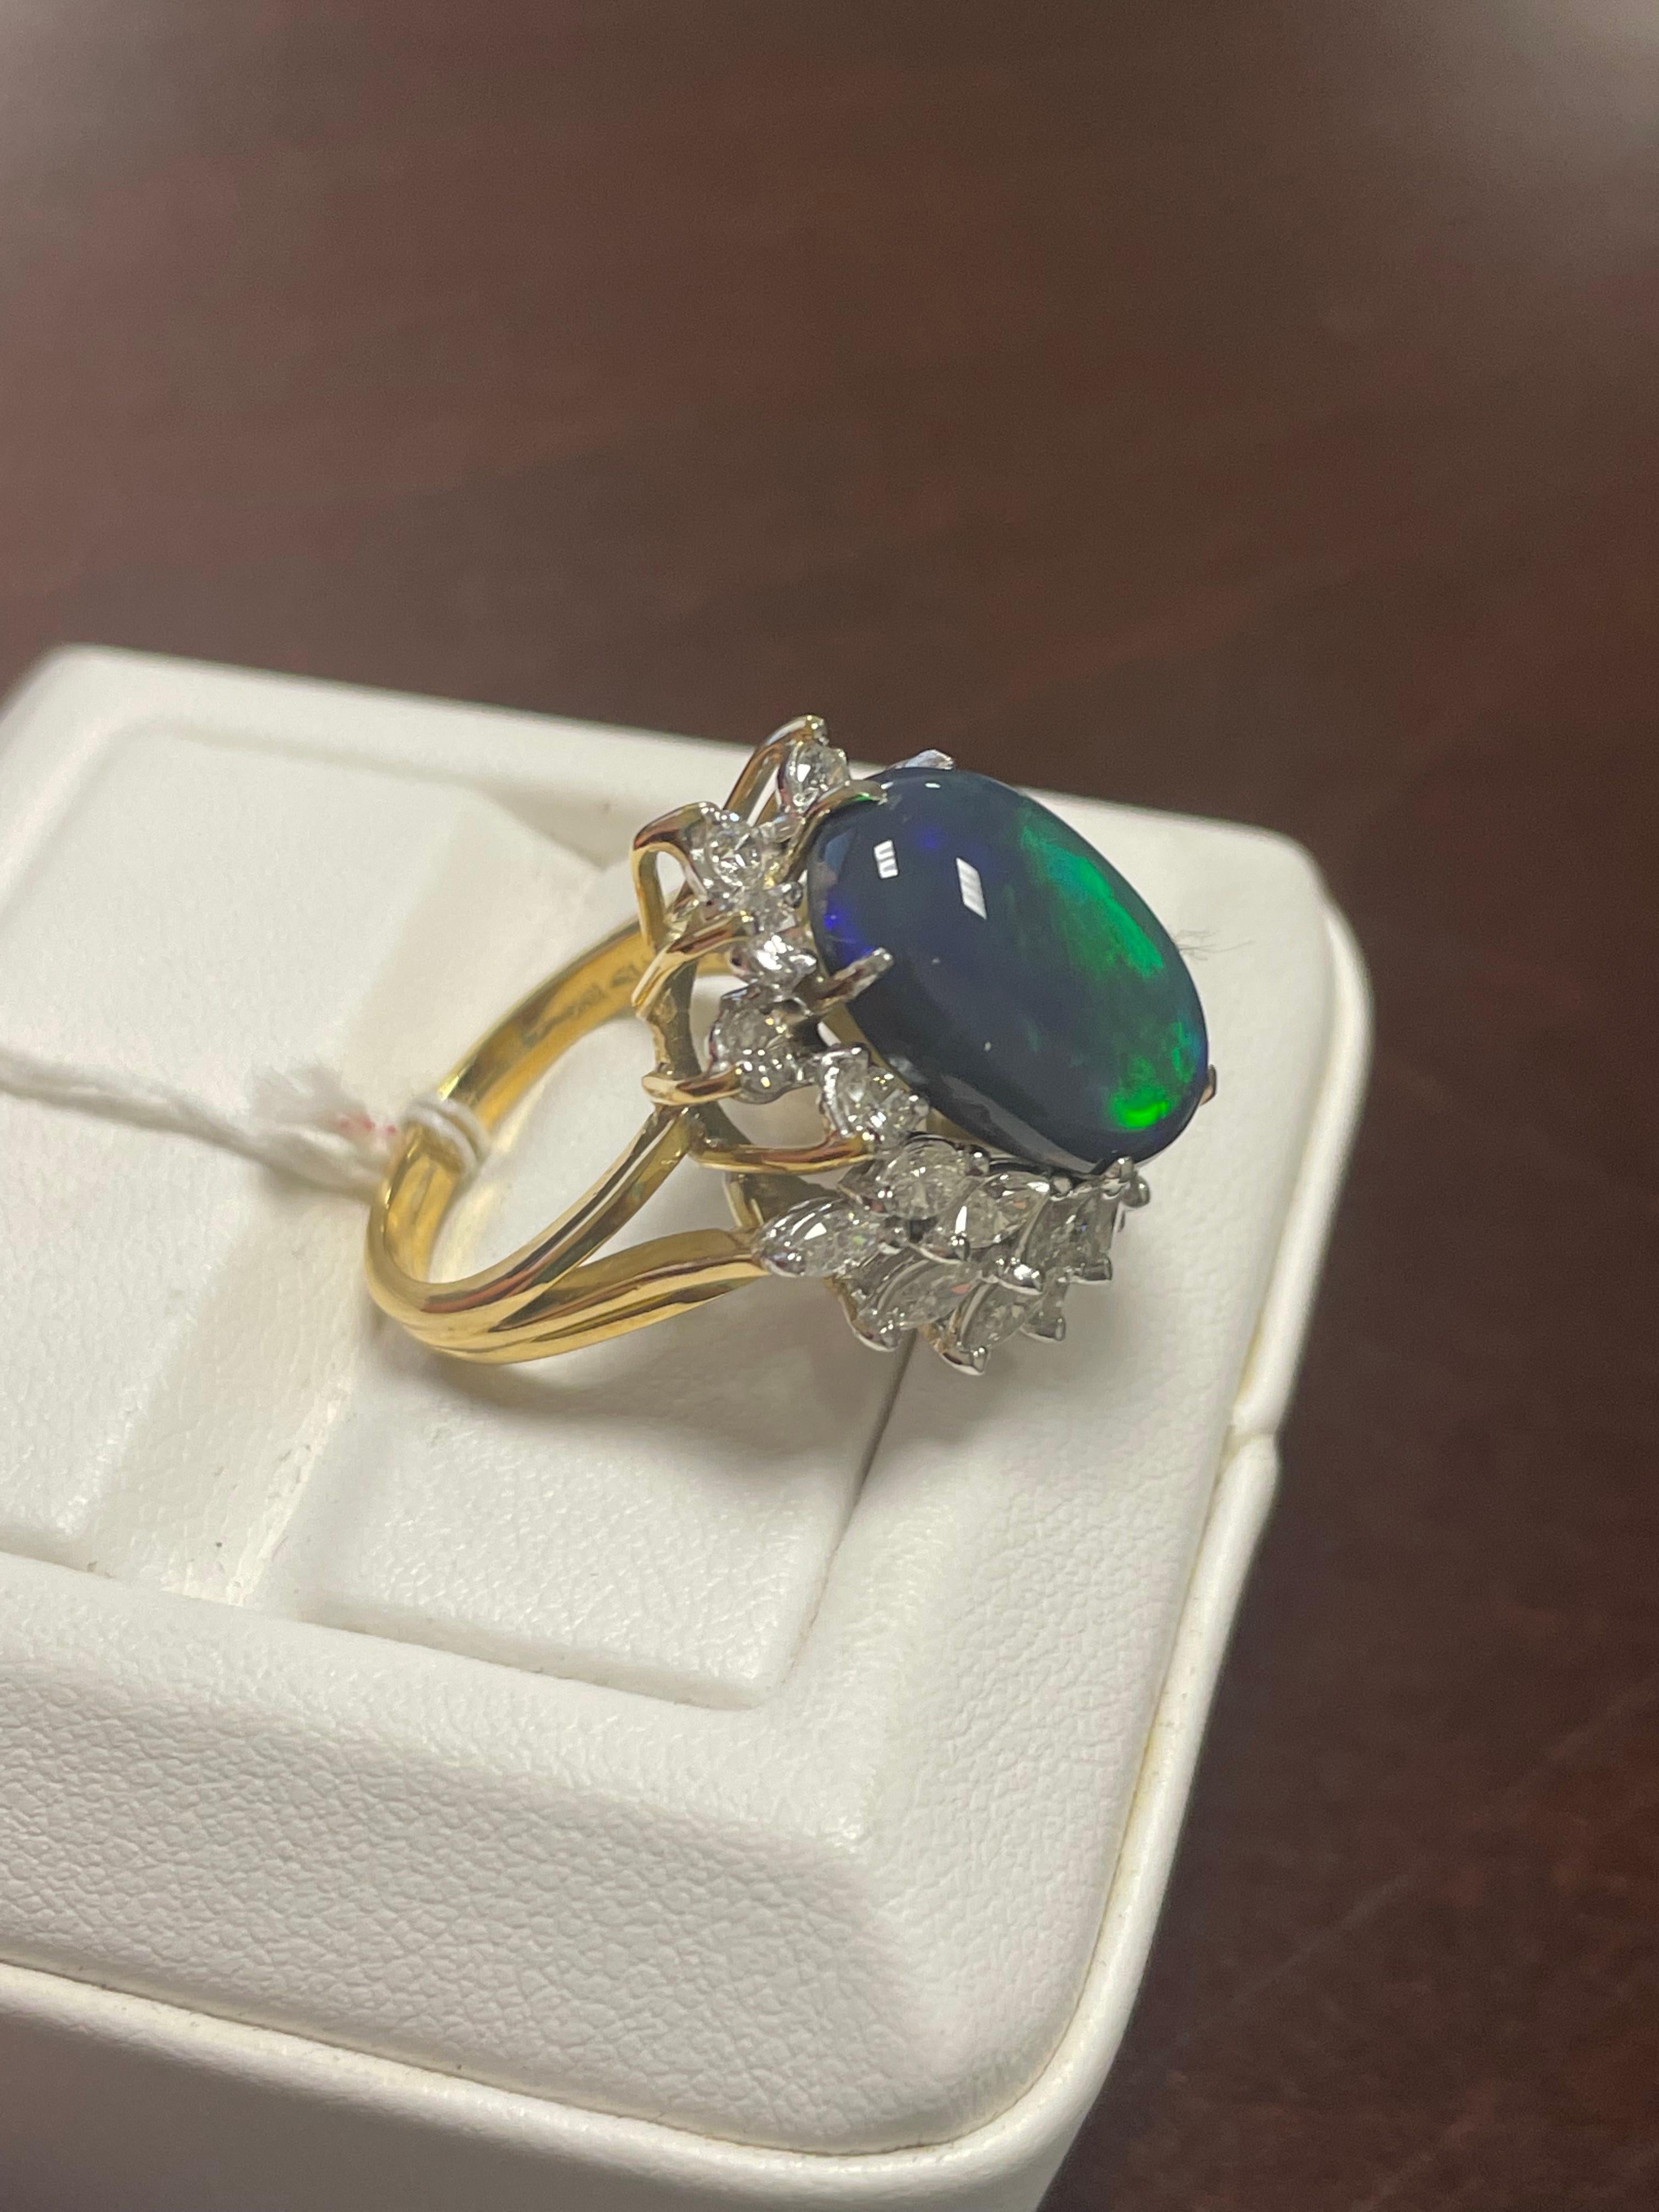 One Lady's black opal and diamond rings with platinum and 18k yellow gold.  This piece is vivid, broad flashy, and extremely bright with brightness of fire.  Fire pattern is seen through saturation scale.  Measurements include 16.8 x 11.5 mm, with